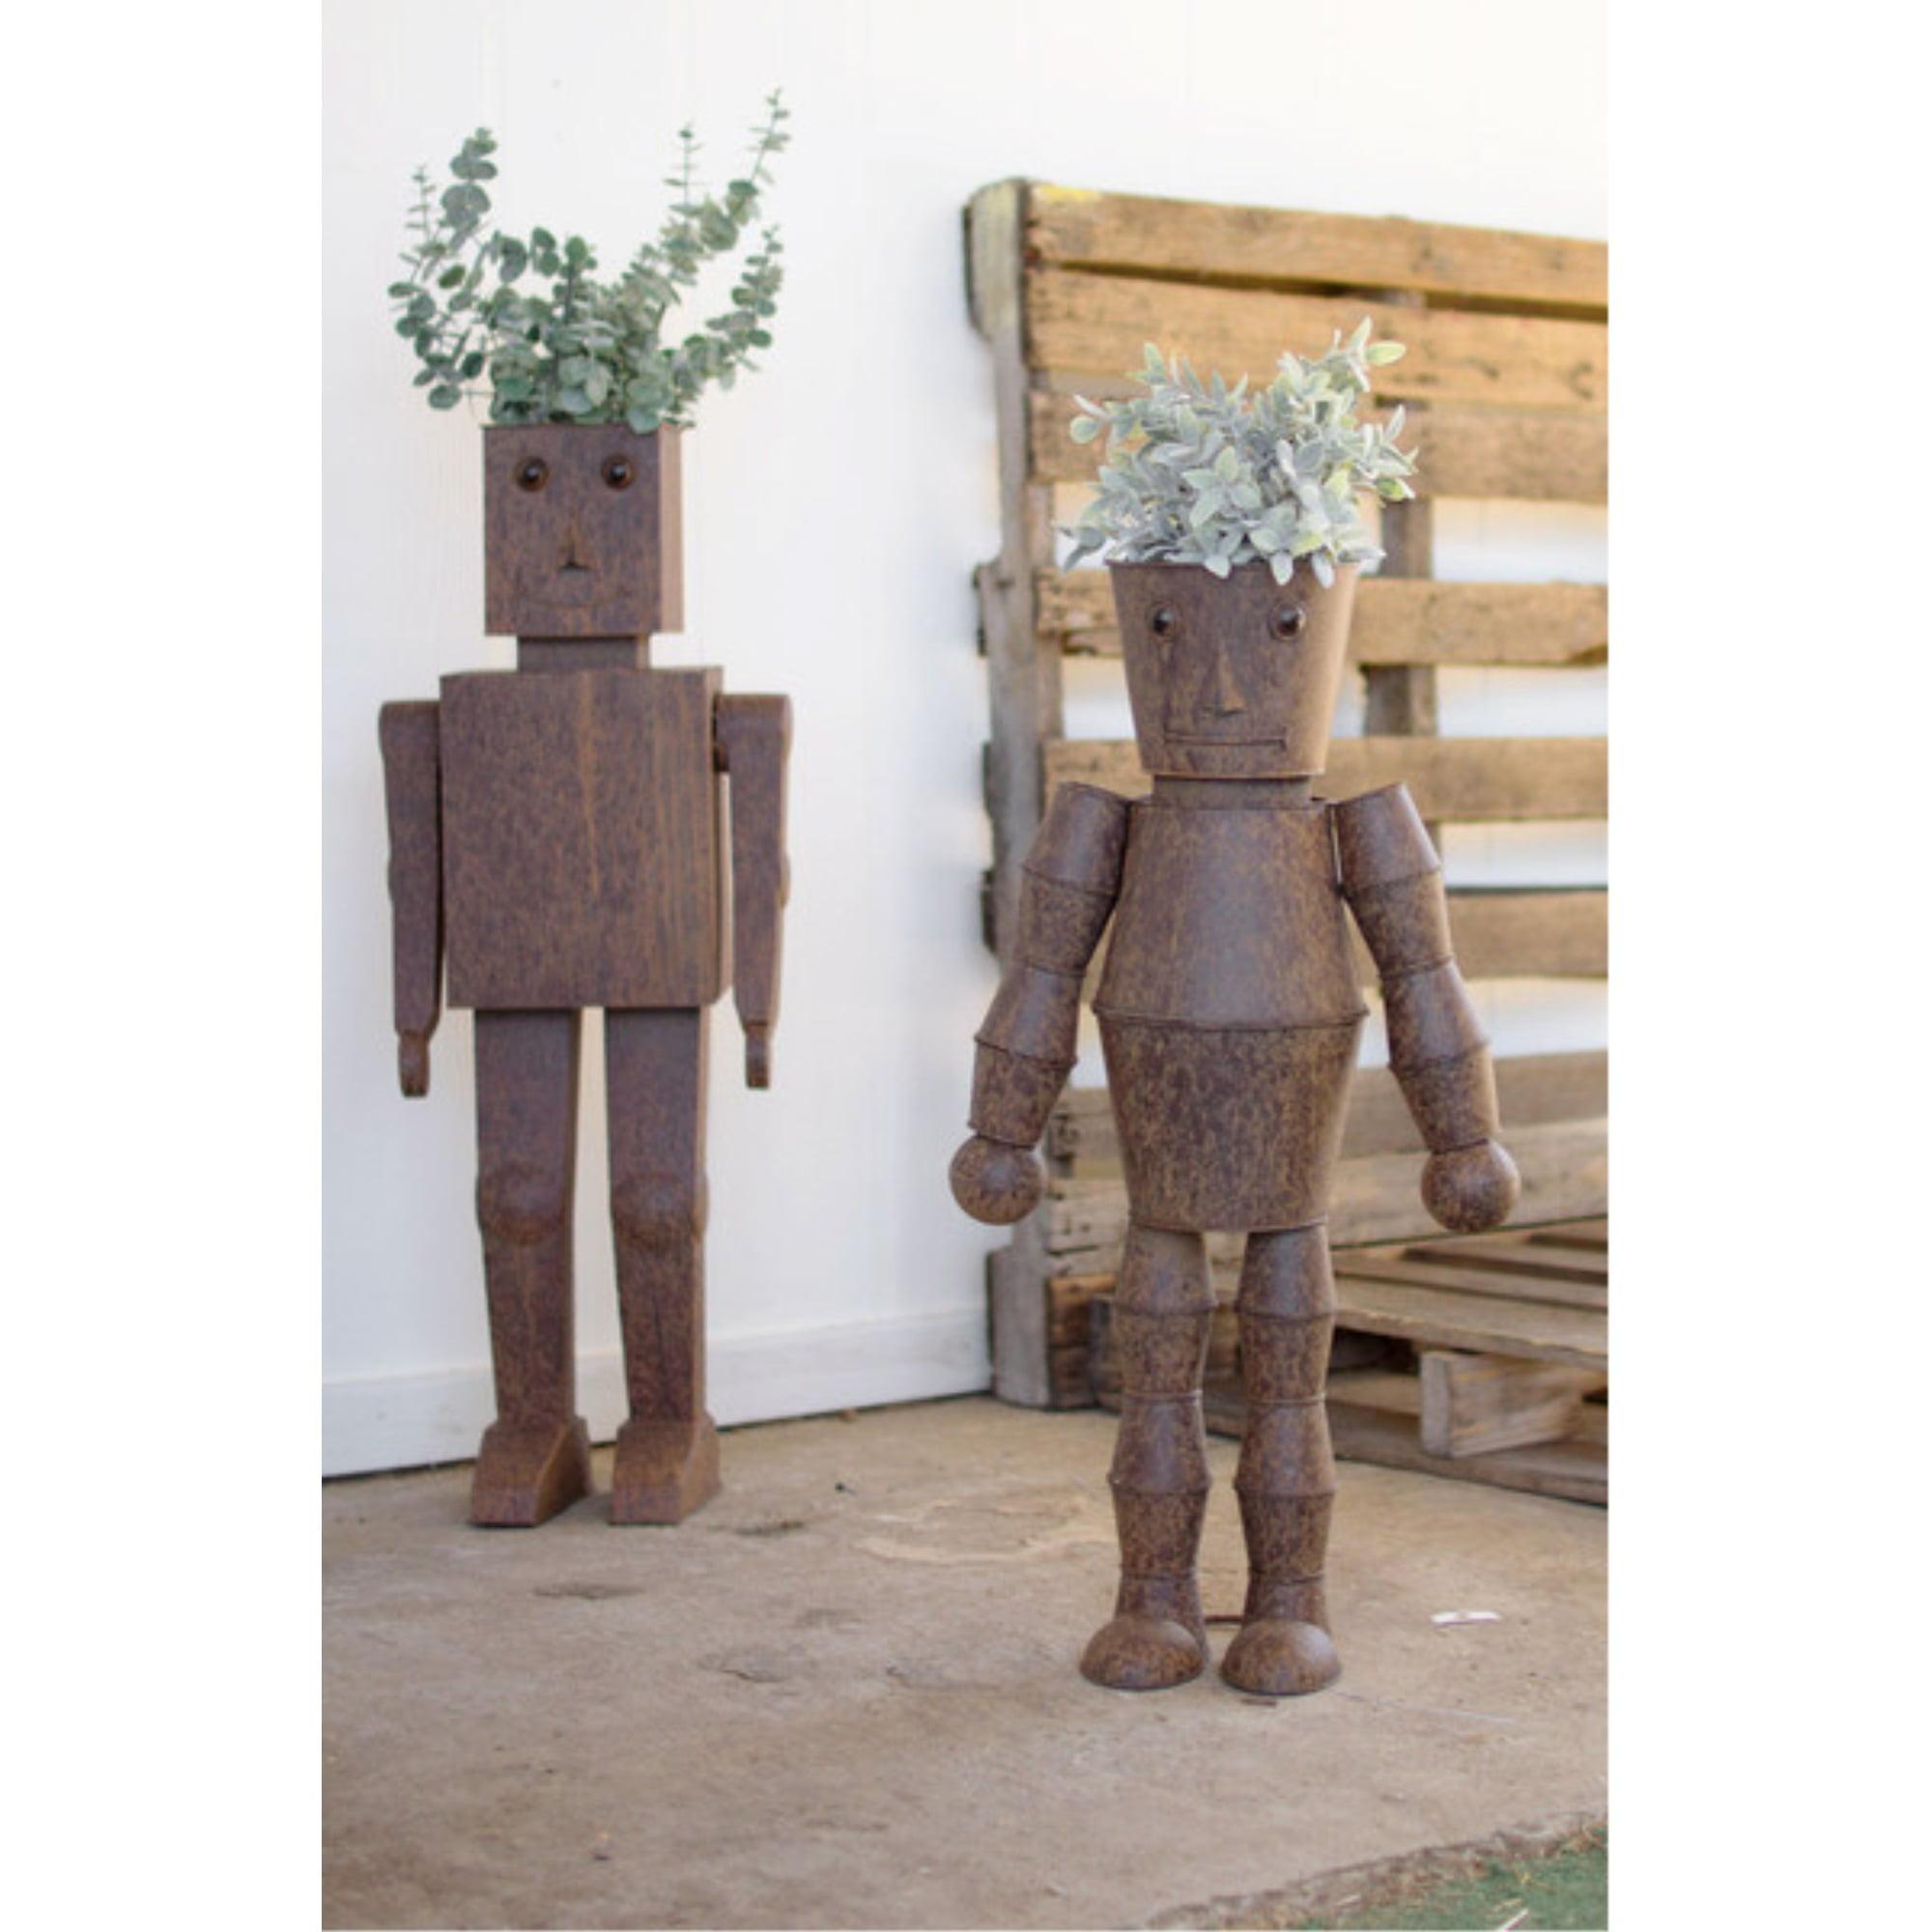 Whimsical Metal Robot Planters for Indoor & Outdoor Decor, Set of 2